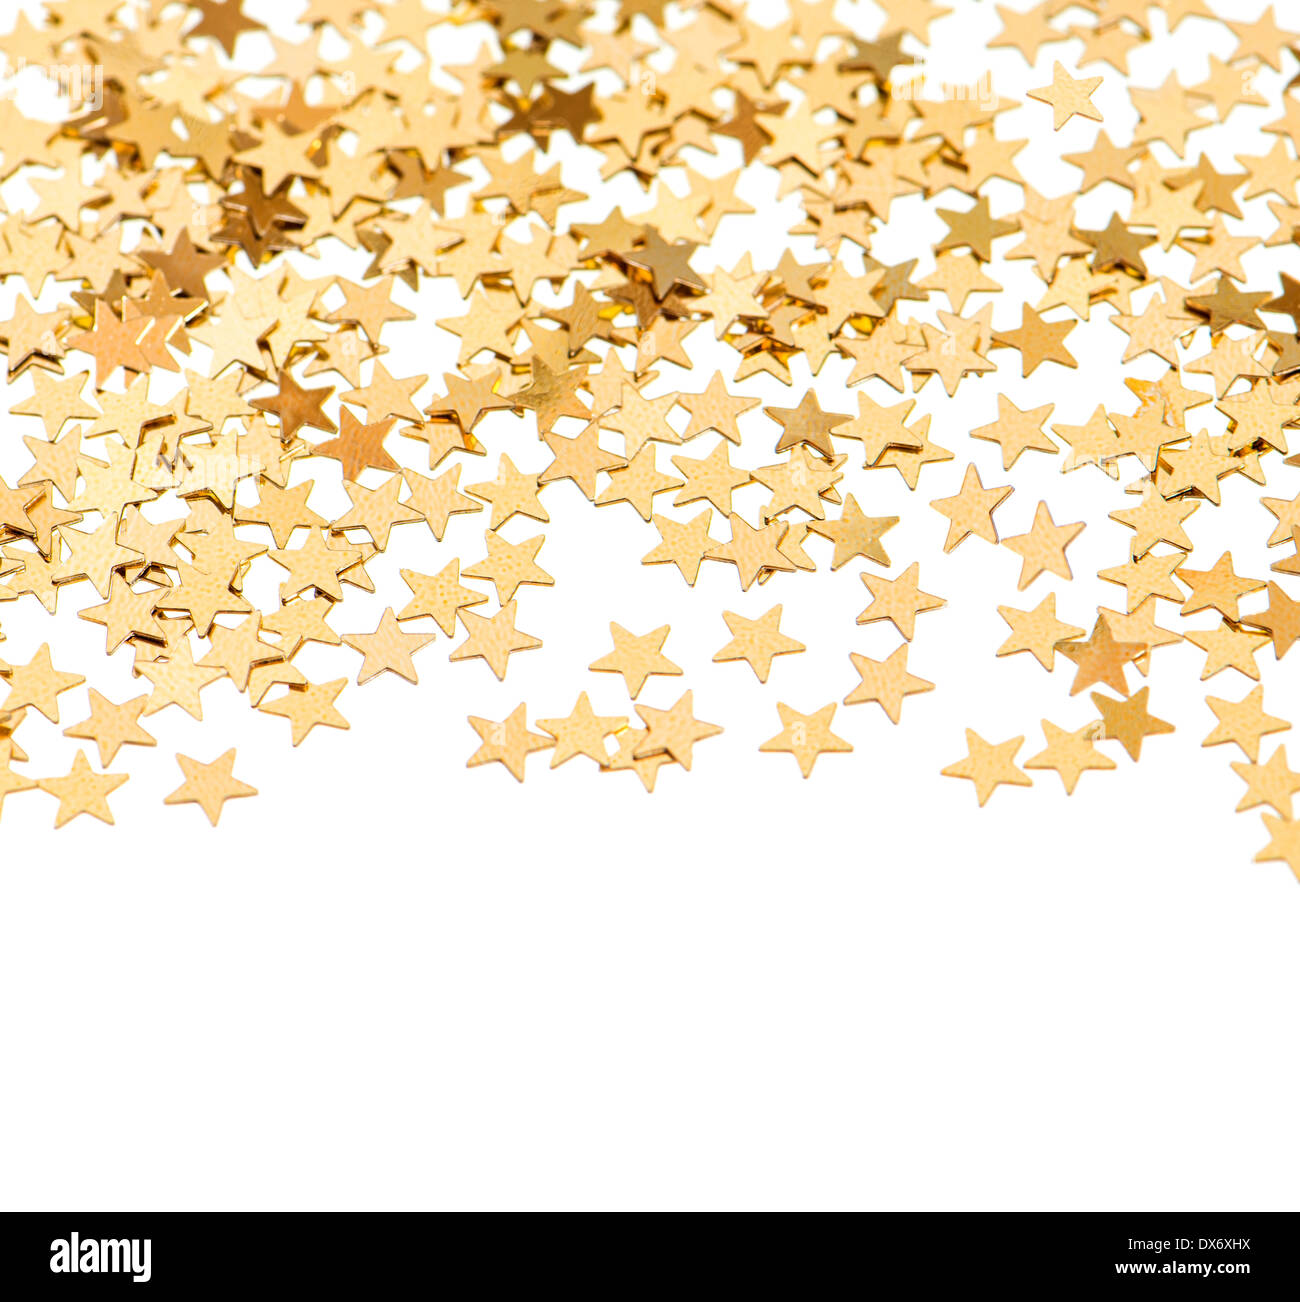 festive background from golden confetti in star shape over white Stock Photo